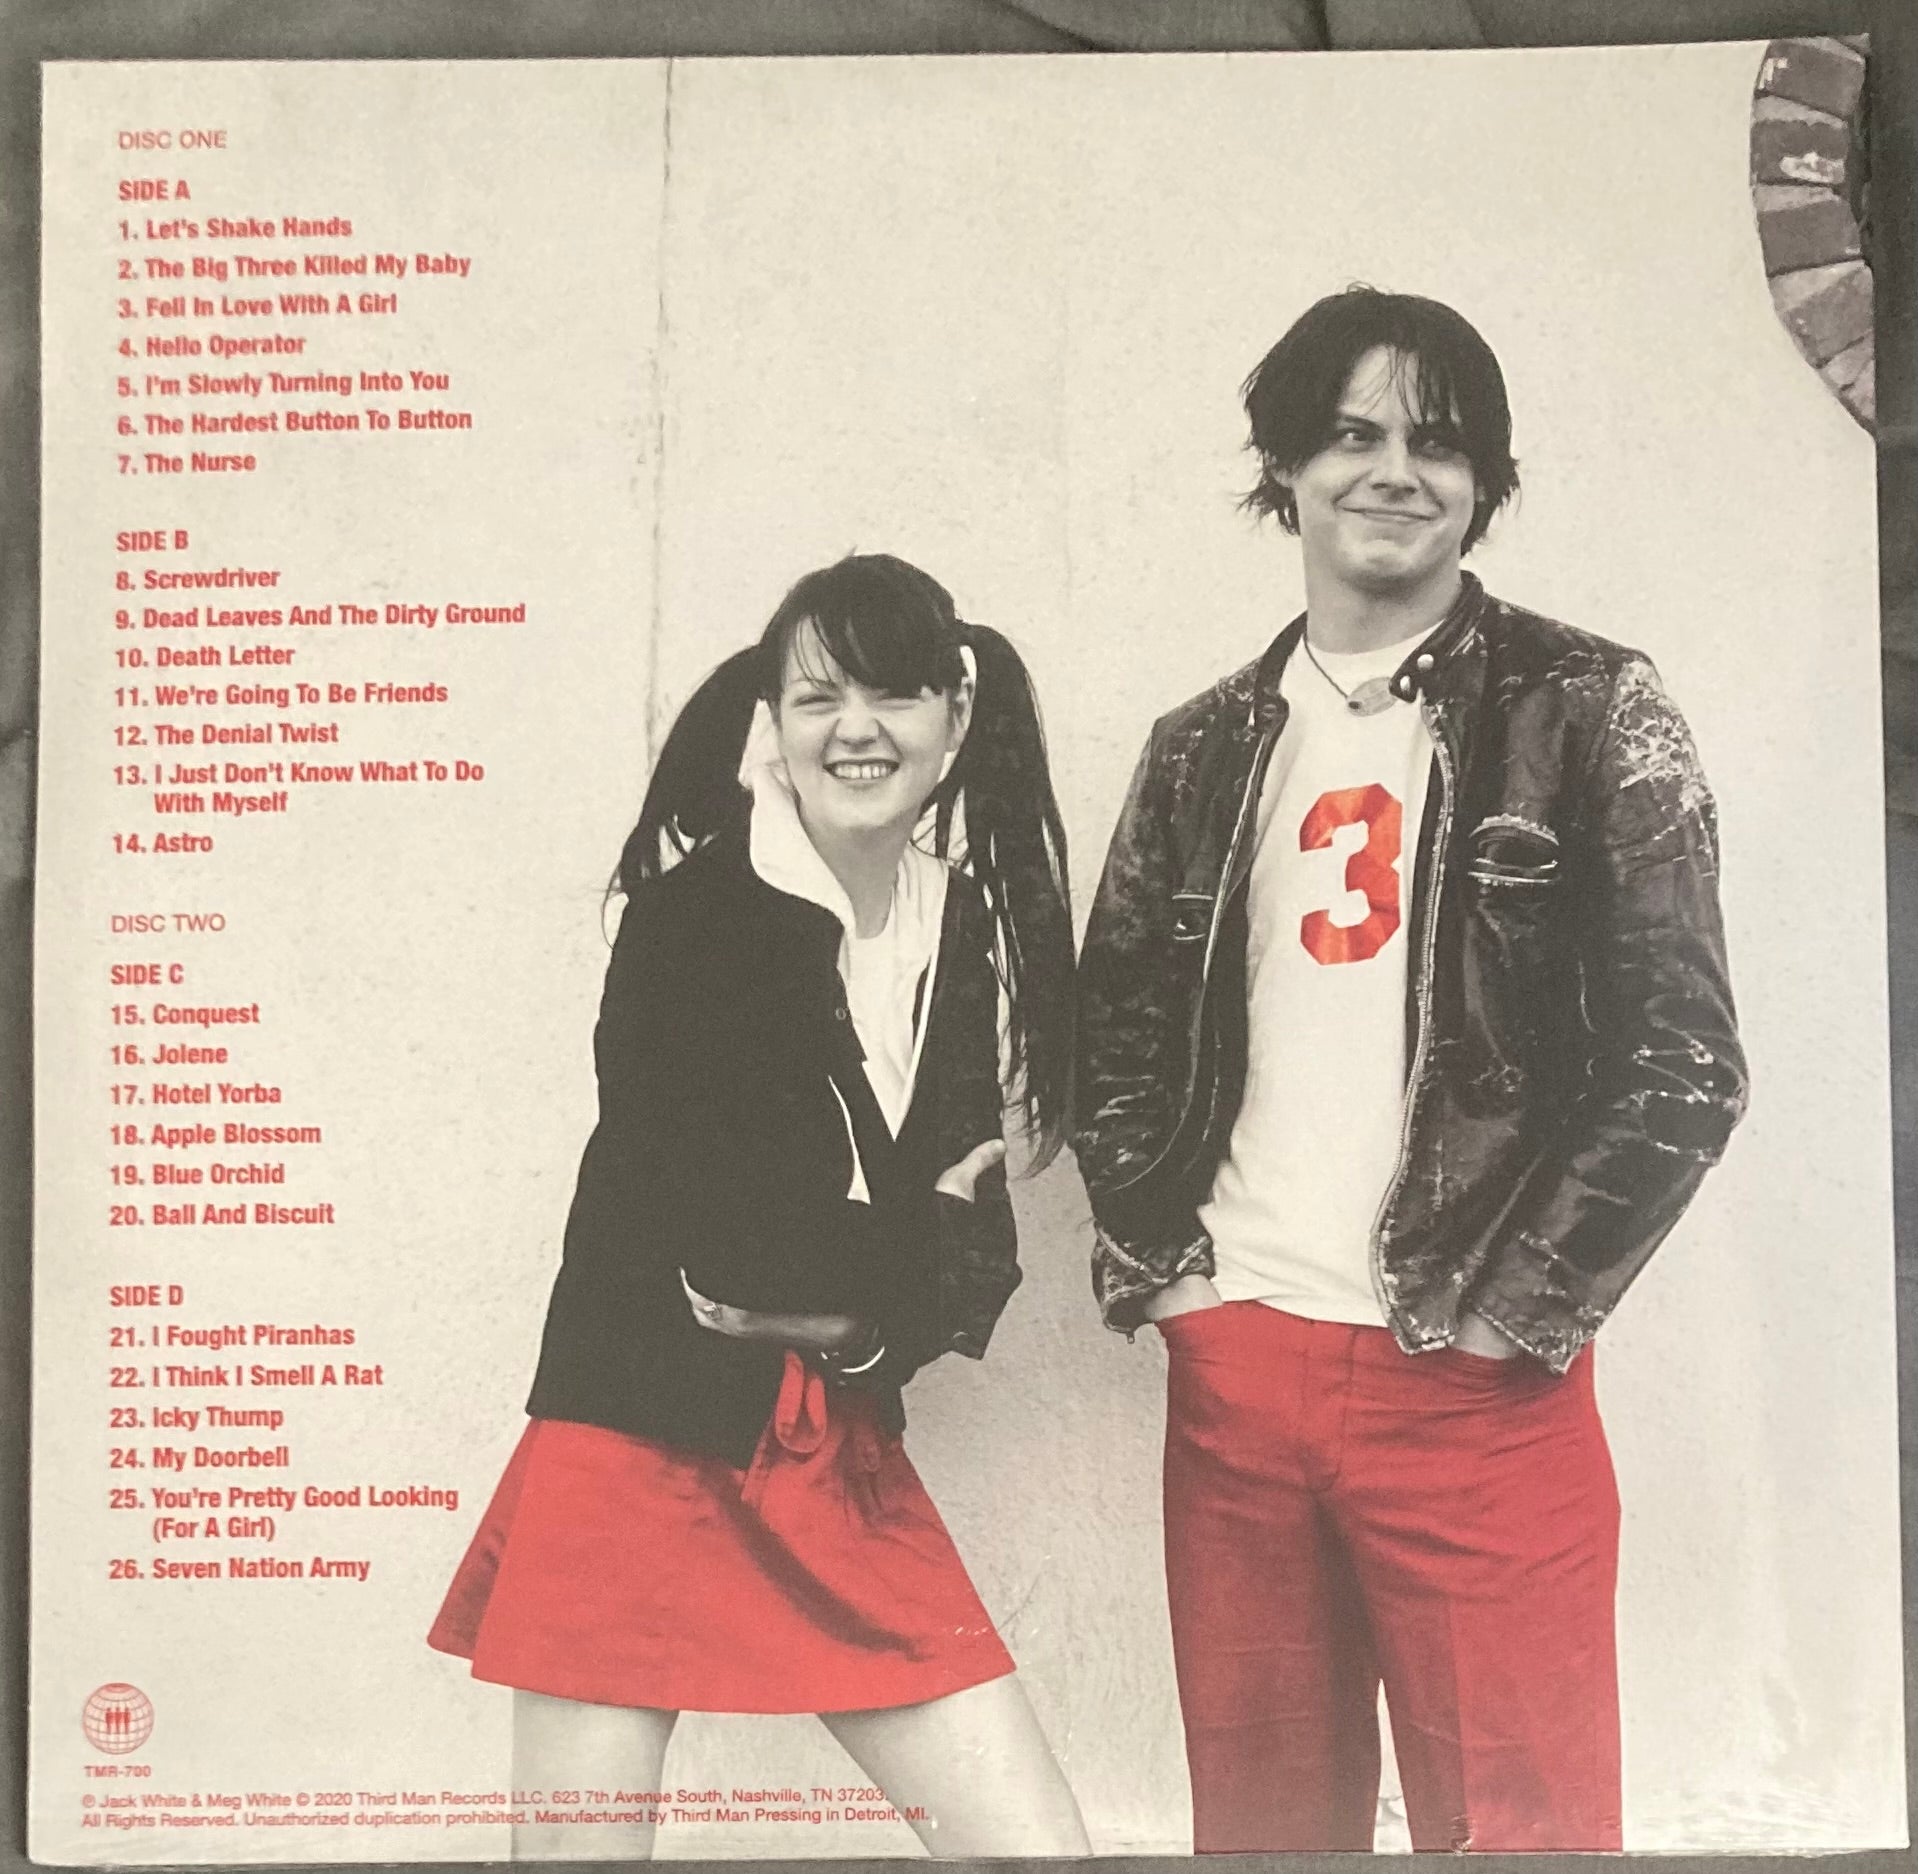 The back of 'The White Stripes - Greatest Hits' on vinyl